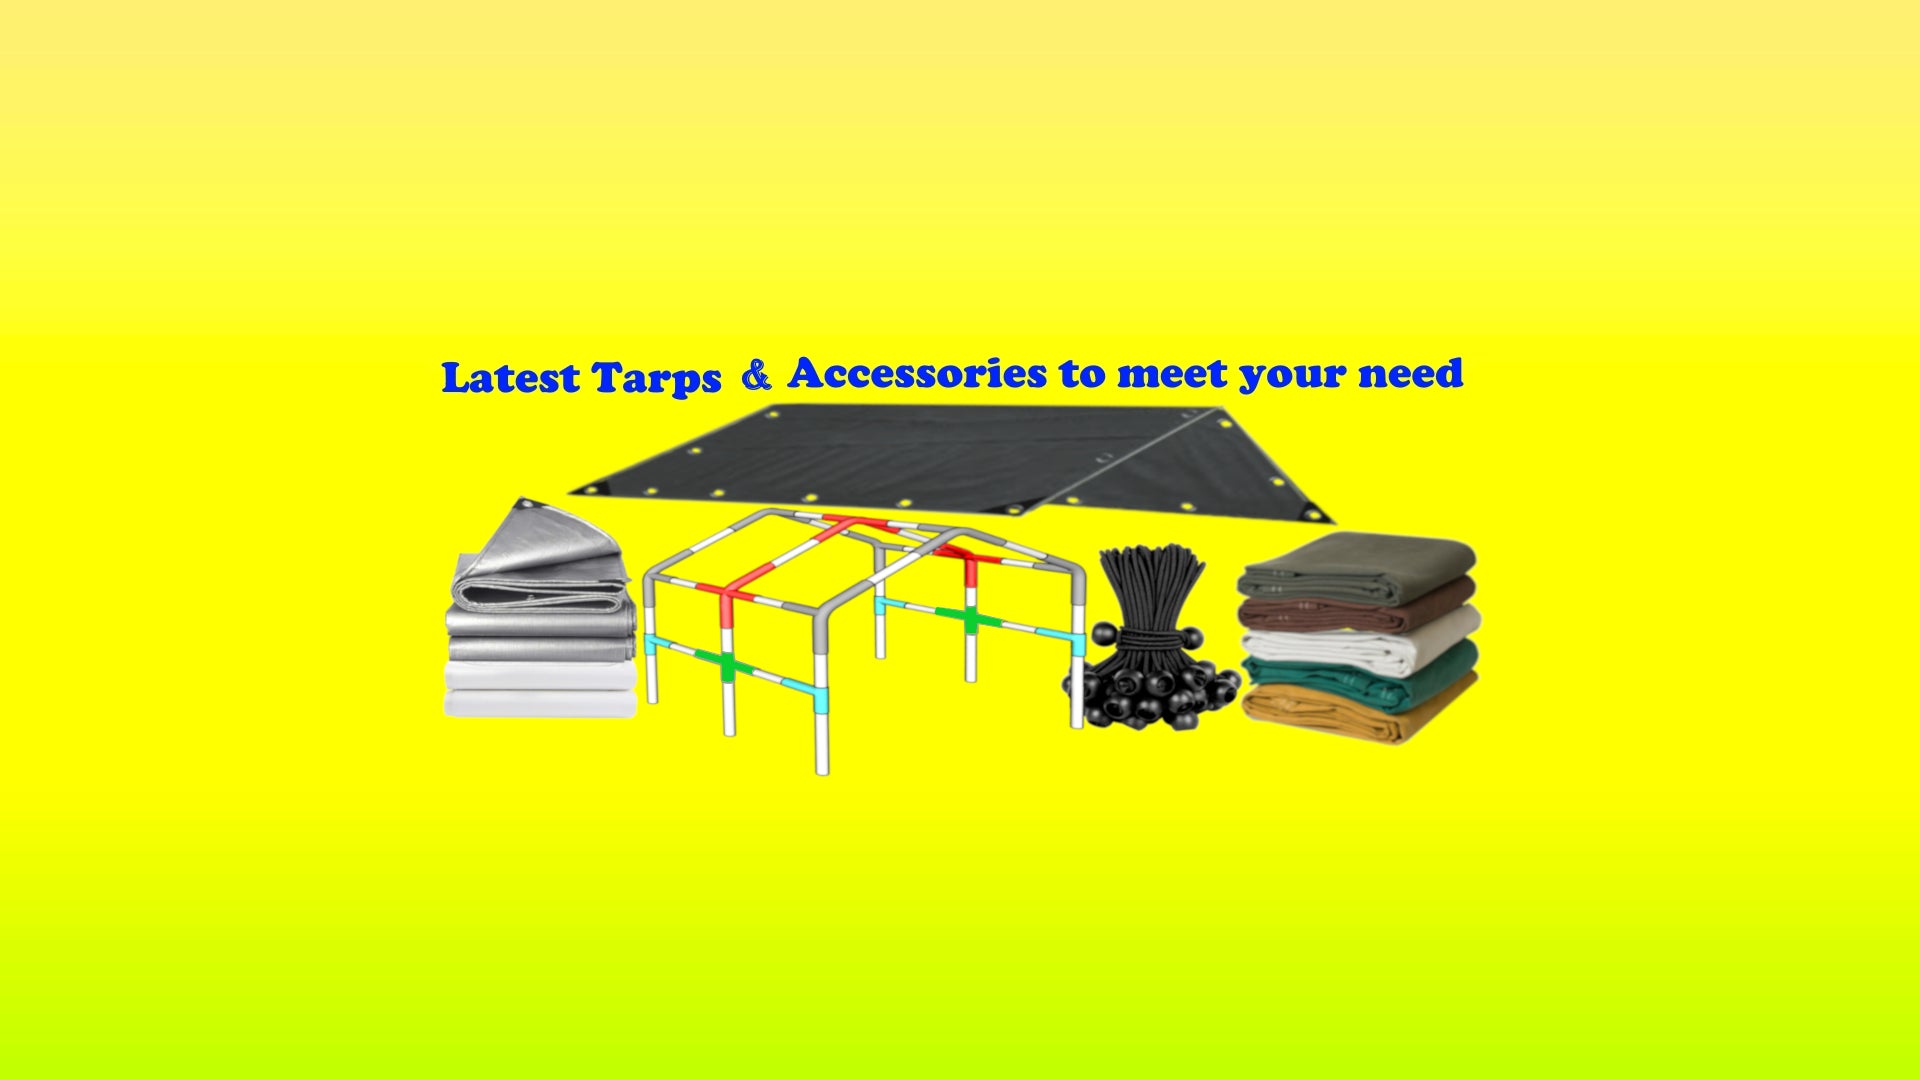 Tarp_accessories_for_home_improvement_carport_canopy_kits_odcdeals